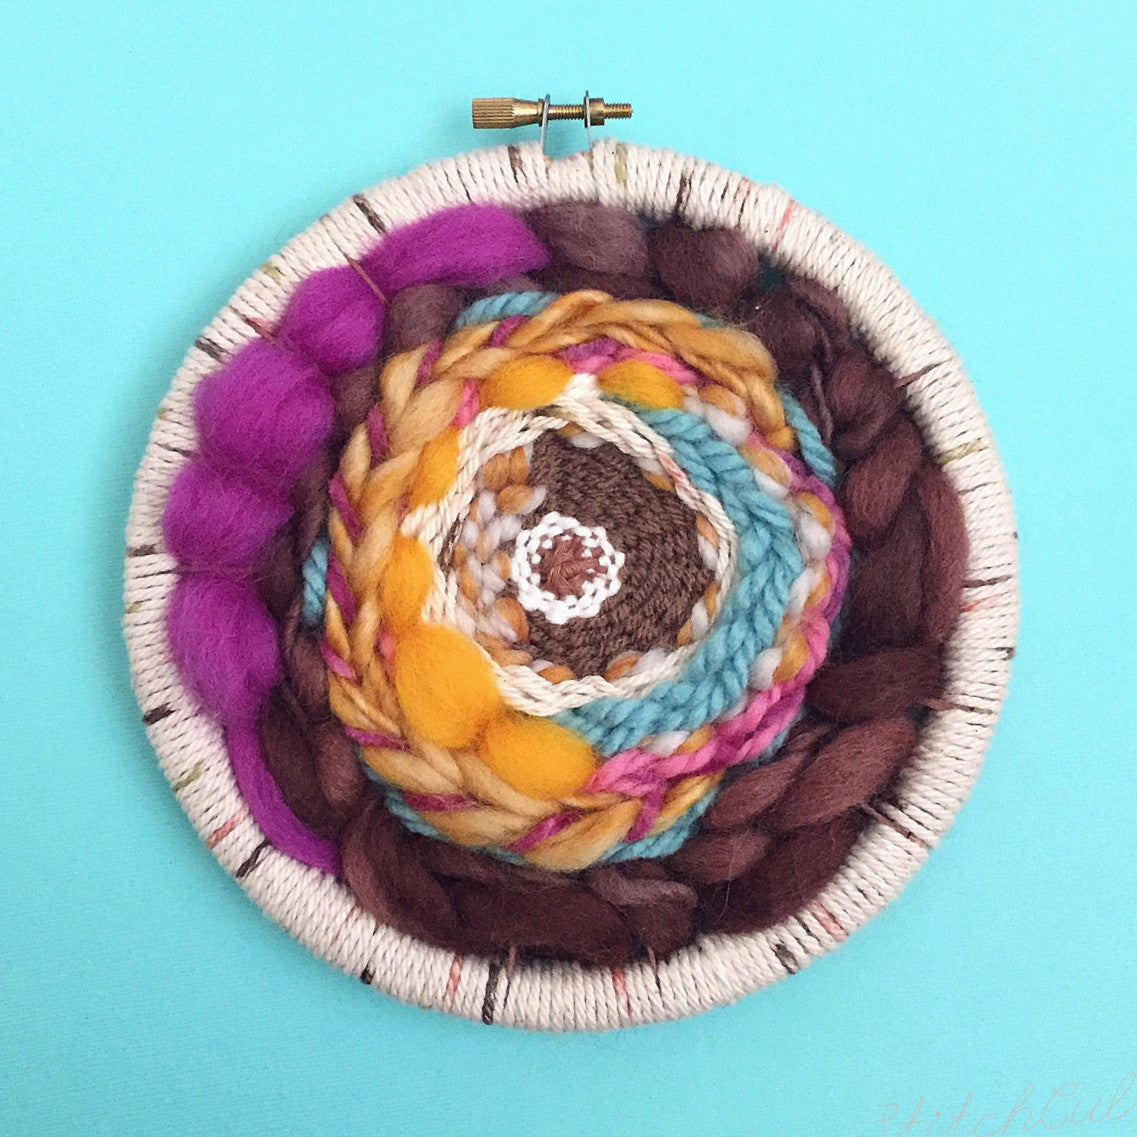 hand woven hoop by stitchculture